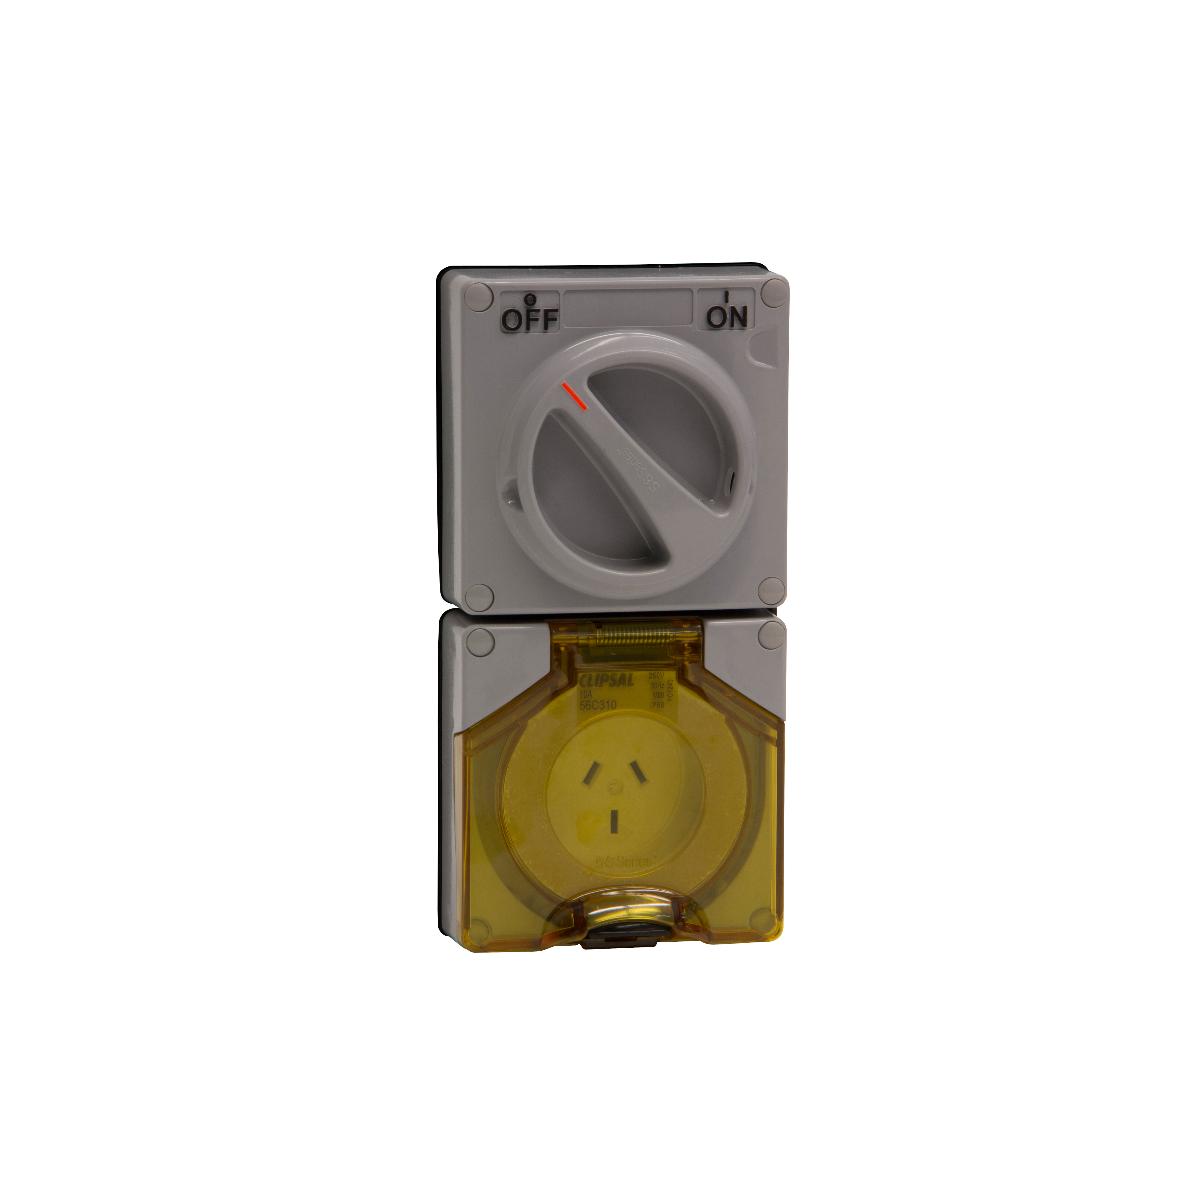 OUTLET SWITCHED IP66 3PIN 10A 250V LE RW